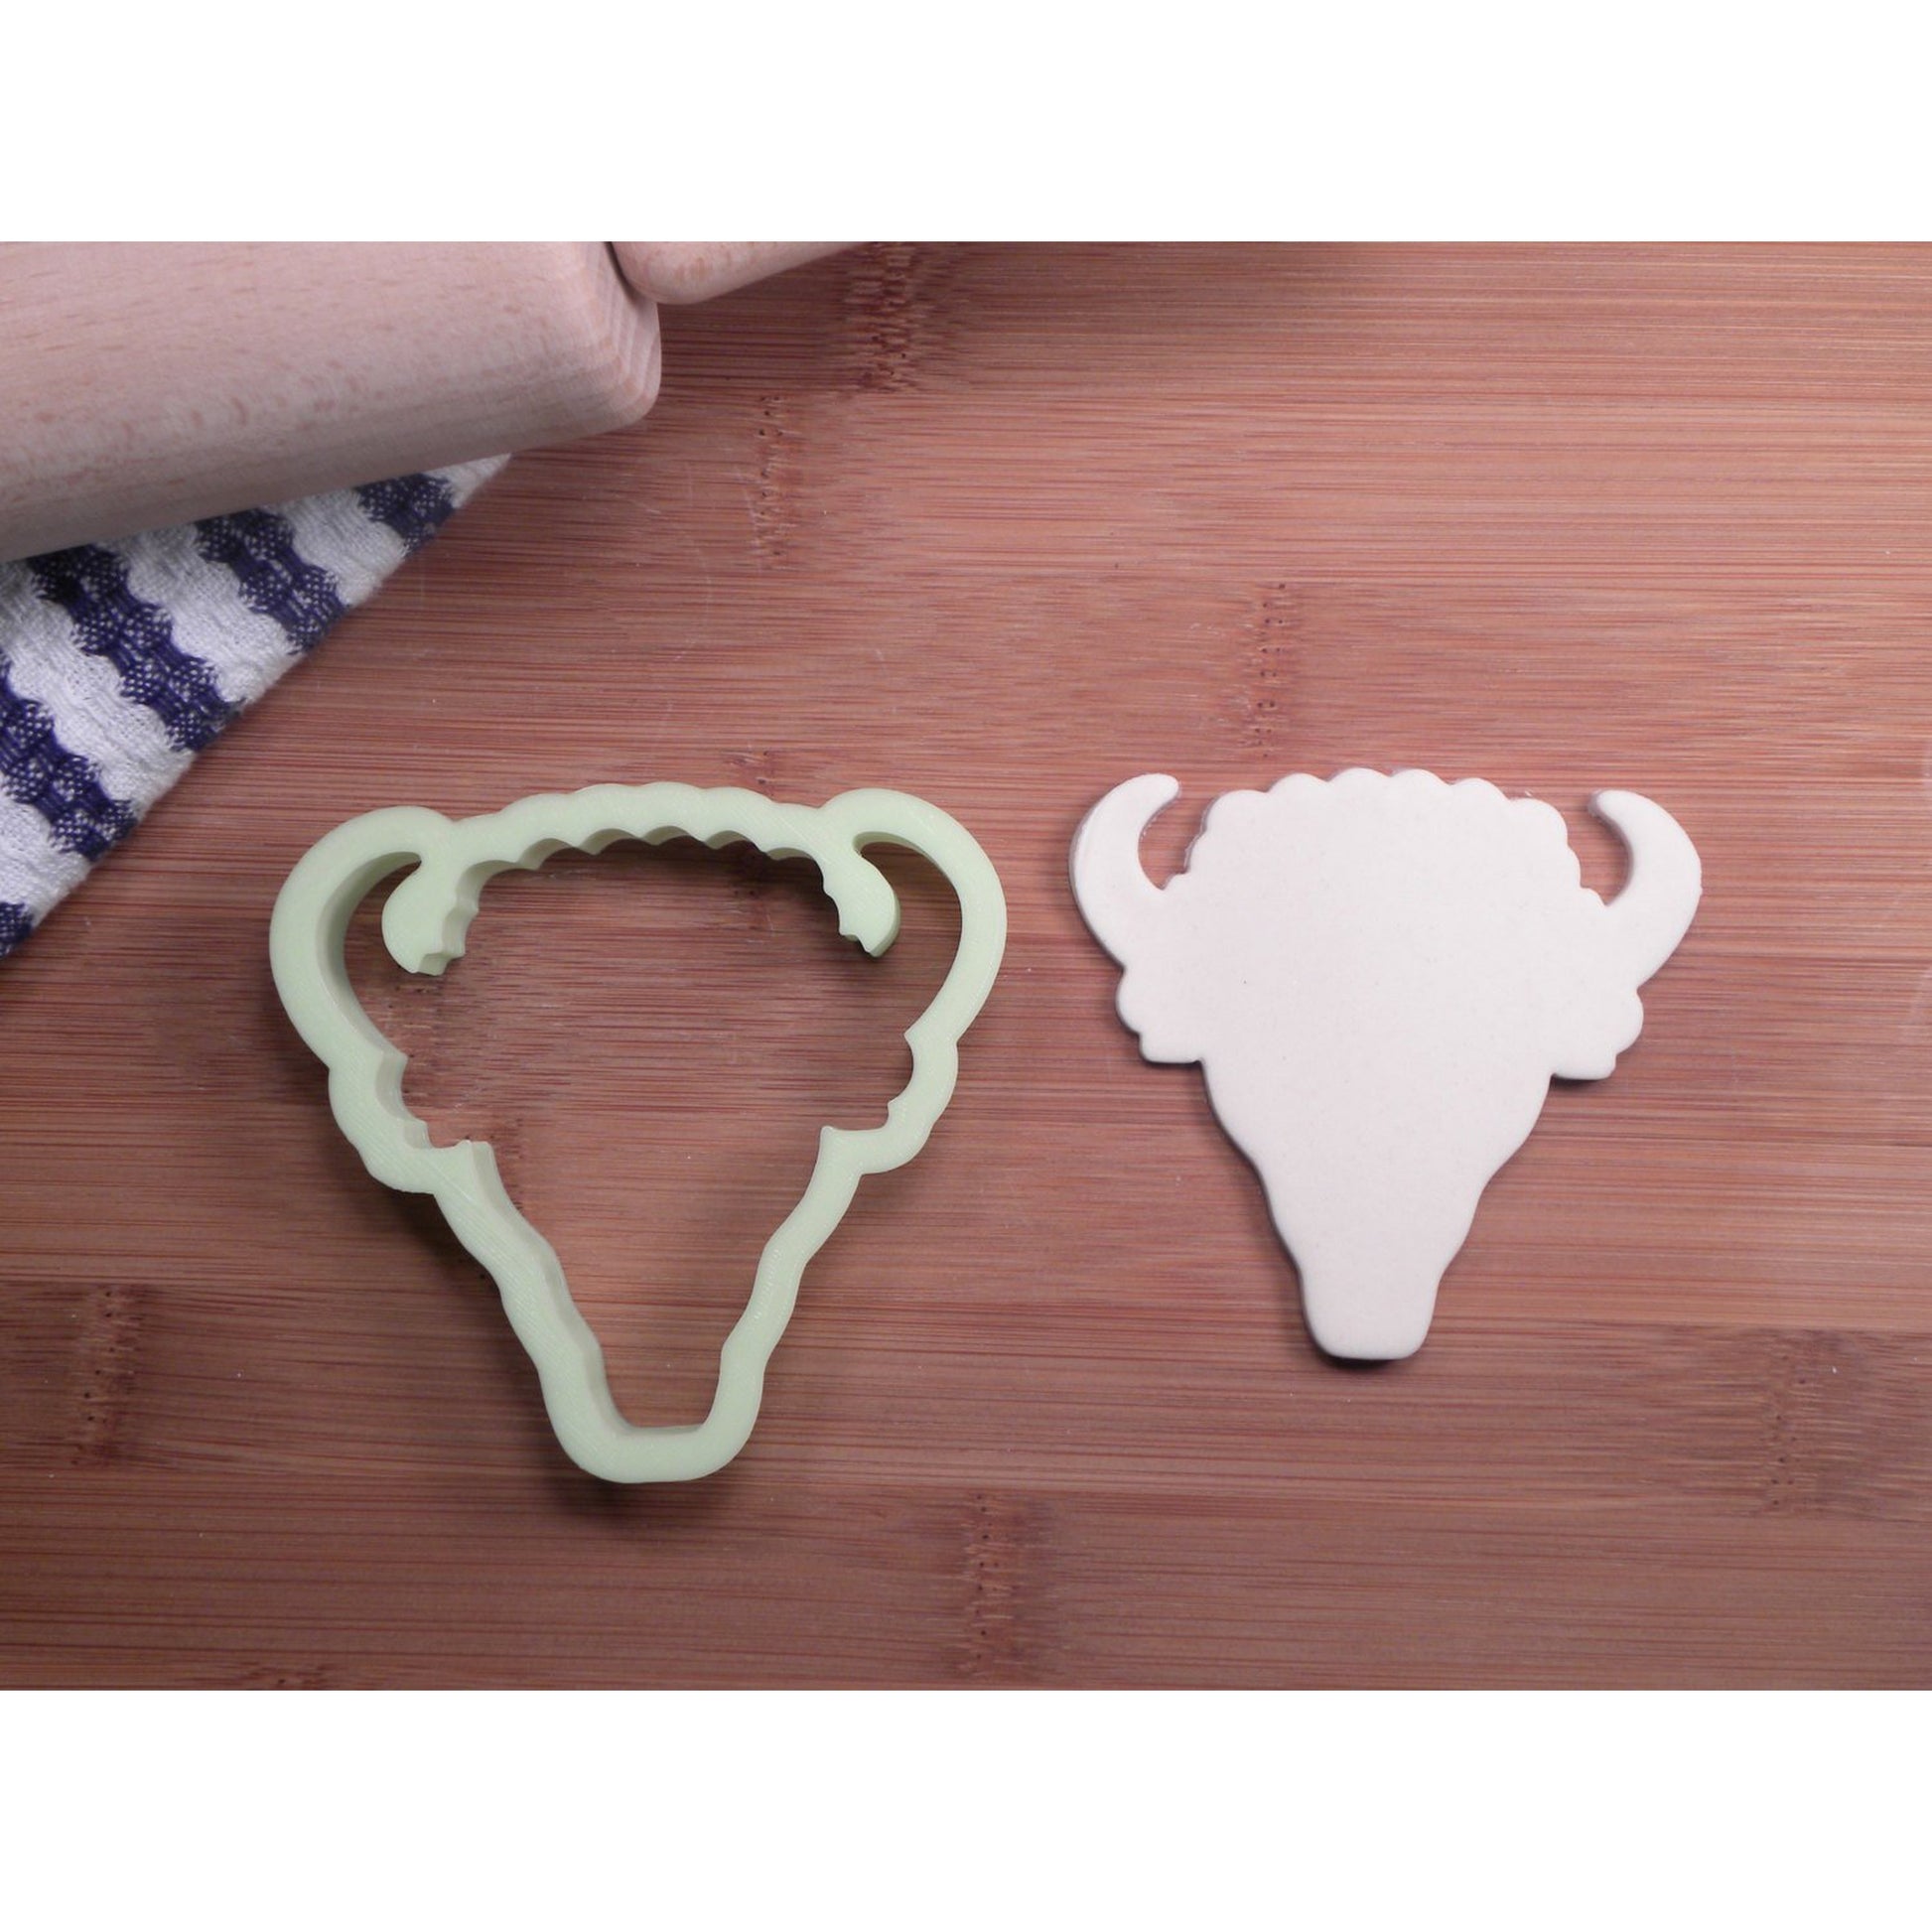 Cow Skull with Flower Crown Cookie Cutter